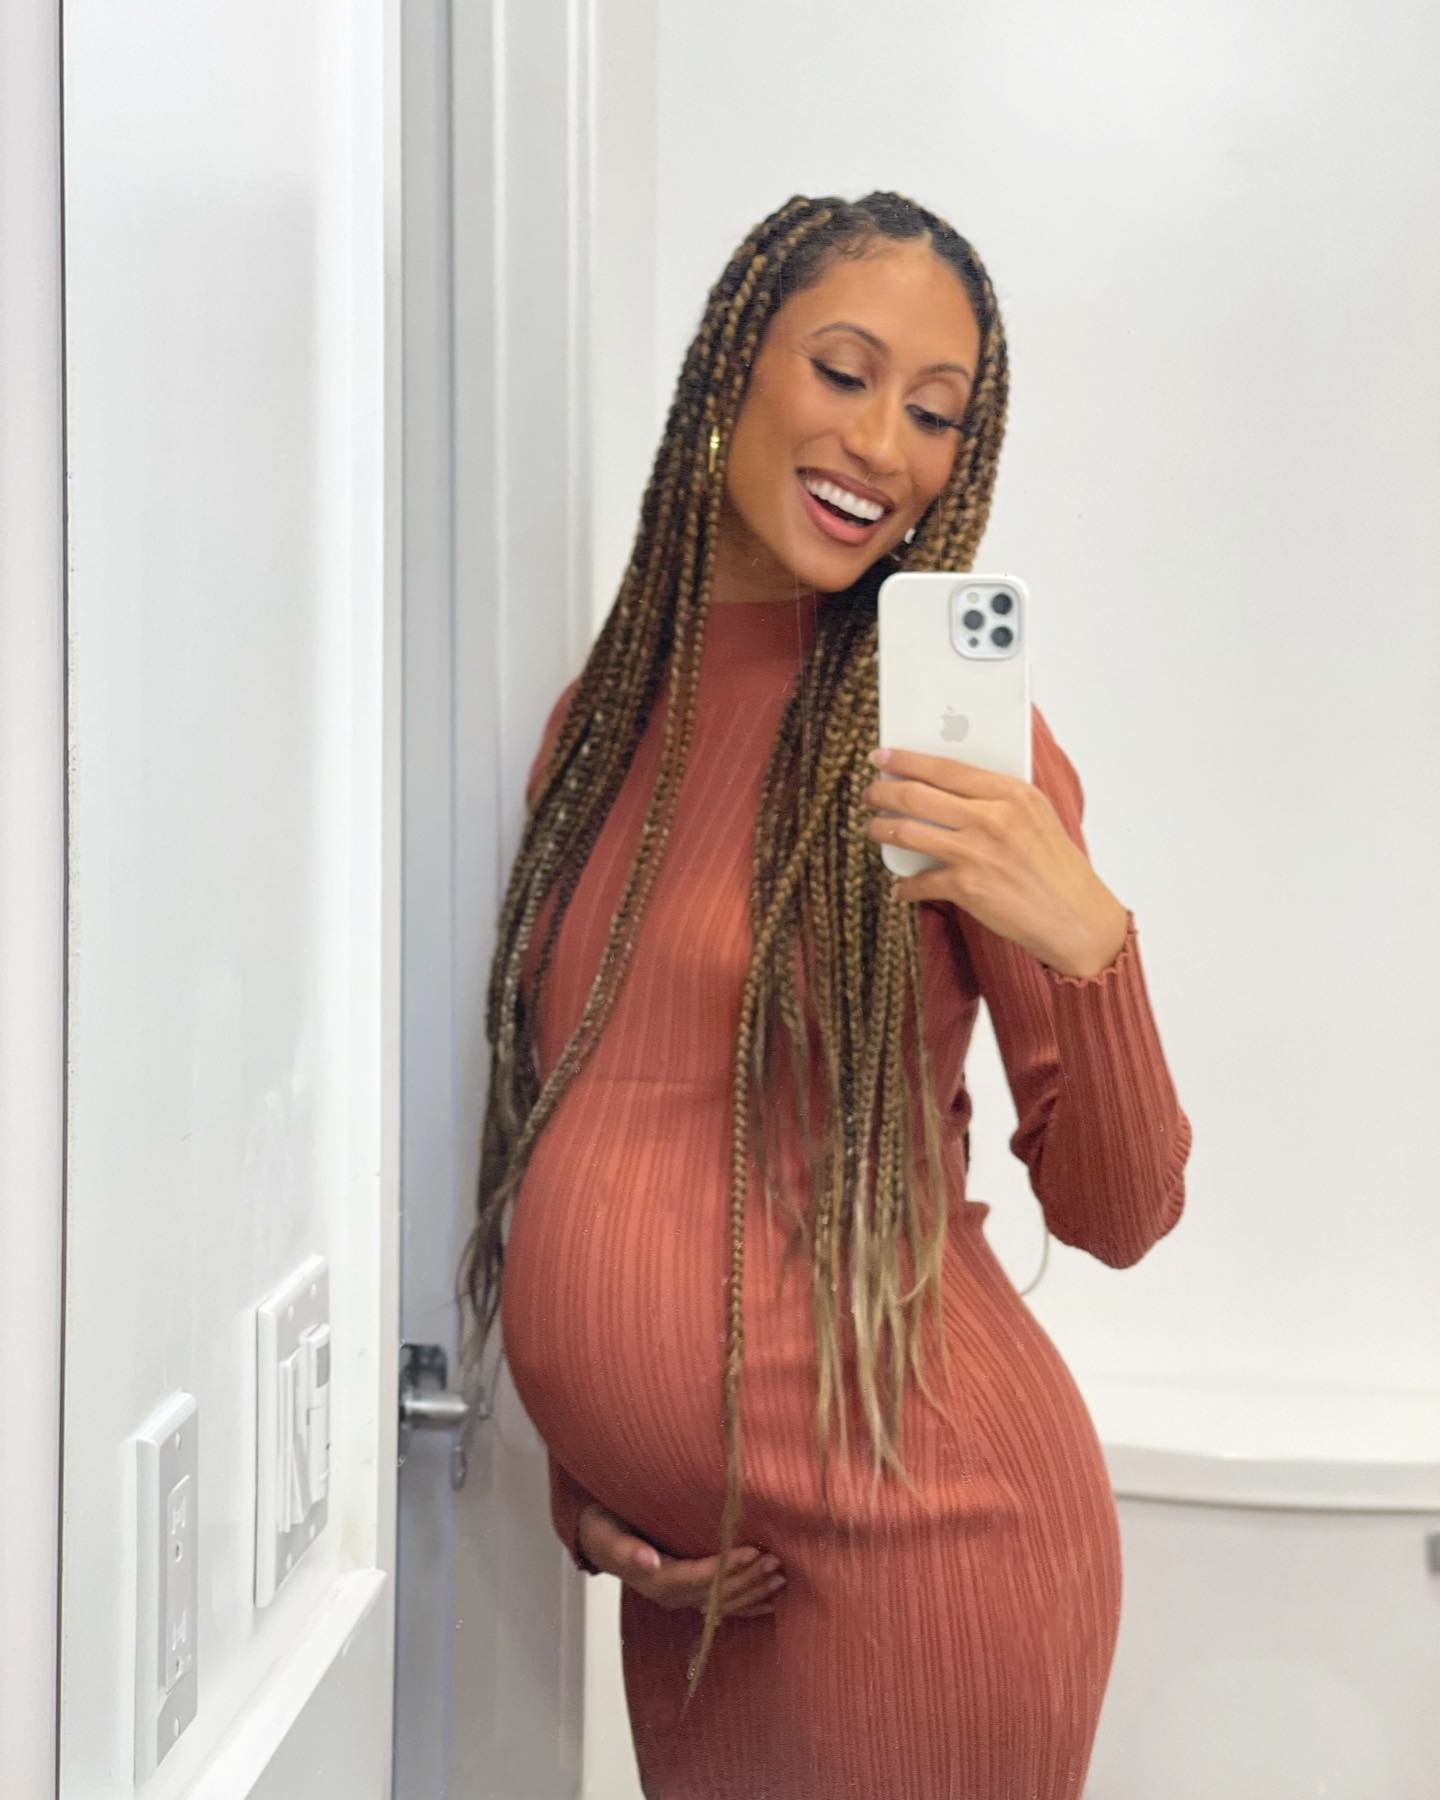 The Talk’s Elaine Welteroth Gives Birth, Welcomes Baby Boy at Home